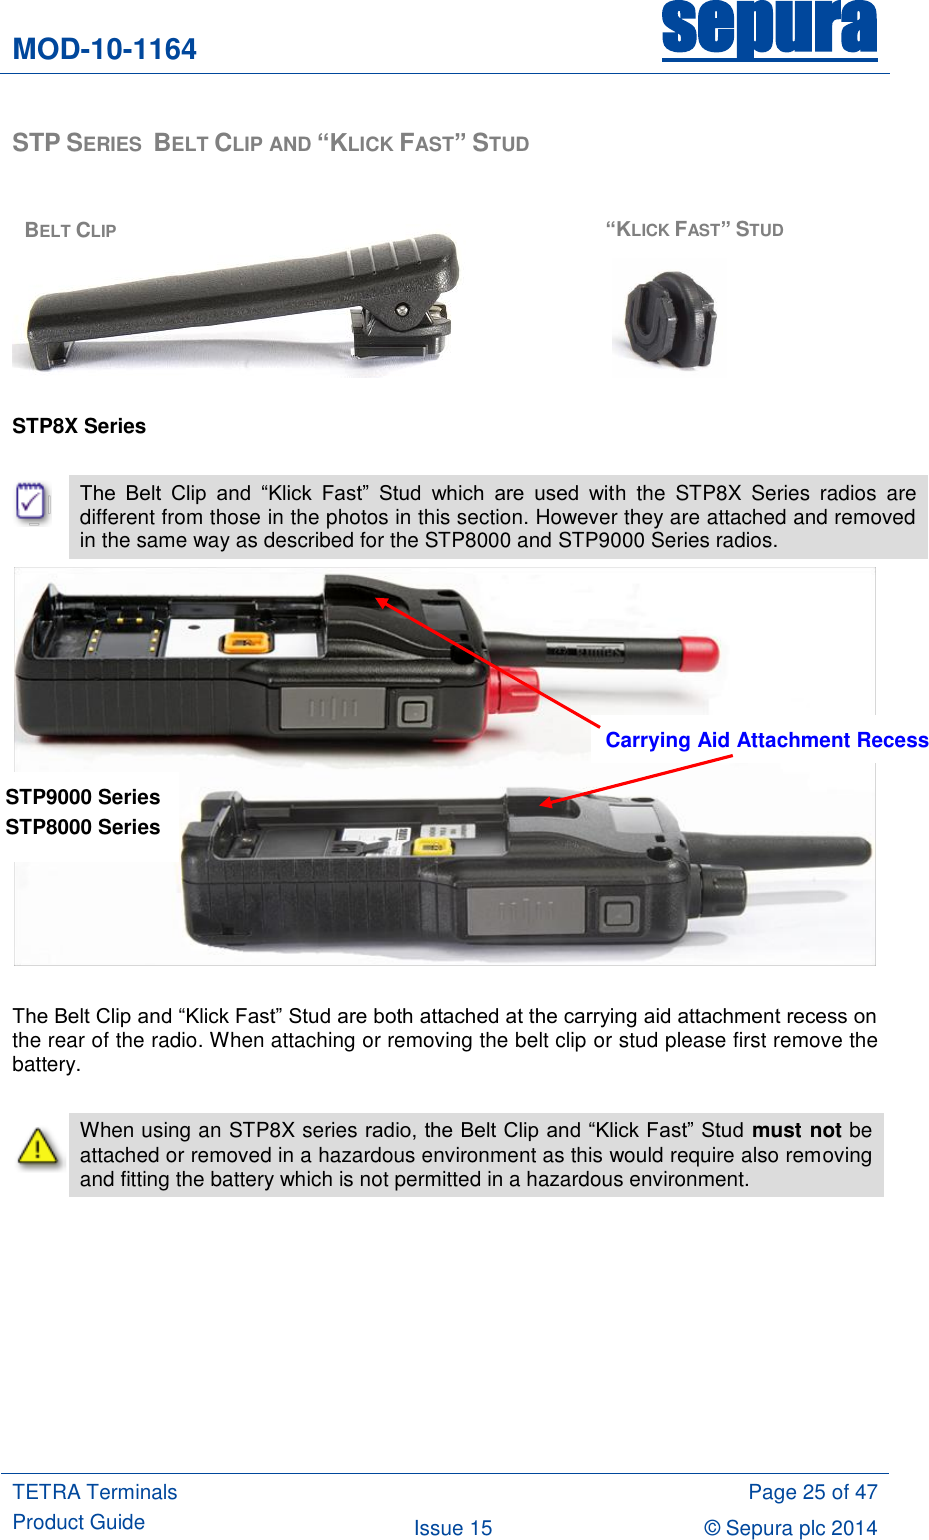 MOD-10-1164 sepura  TETRA Terminals Product Guide  Page 25 of 47 Issue 15 © Sepura plc 2014   STP SERIES  BELT CLIP AND “KLICK FAST” STUD         STP8X Series   The  Belt  Clip  and  “Klick  Fast”  Stud  which  are  used  with  the  STP8X  Series  radios  are different from those in the photos in this section. However they are attached and removed in the same way as described for the STP8000 and STP9000 Series radios.   The Belt Clip and “Klick Fast” Stud are both attached at the carrying aid attachment recess on the rear of the radio. When attaching or removing the belt clip or stud please first remove the battery.   When using an STP8X series radio, the Belt Clip and “Klick Fast” Stud must not be attached or removed in a hazardous environment as this would require also removing and fitting the battery which is not permitted in a hazardous environment.   BELT CLIP “KLICK FAST” STUD Carrying Aid Attachment Recess STP9000 Series  STP8000 Series  